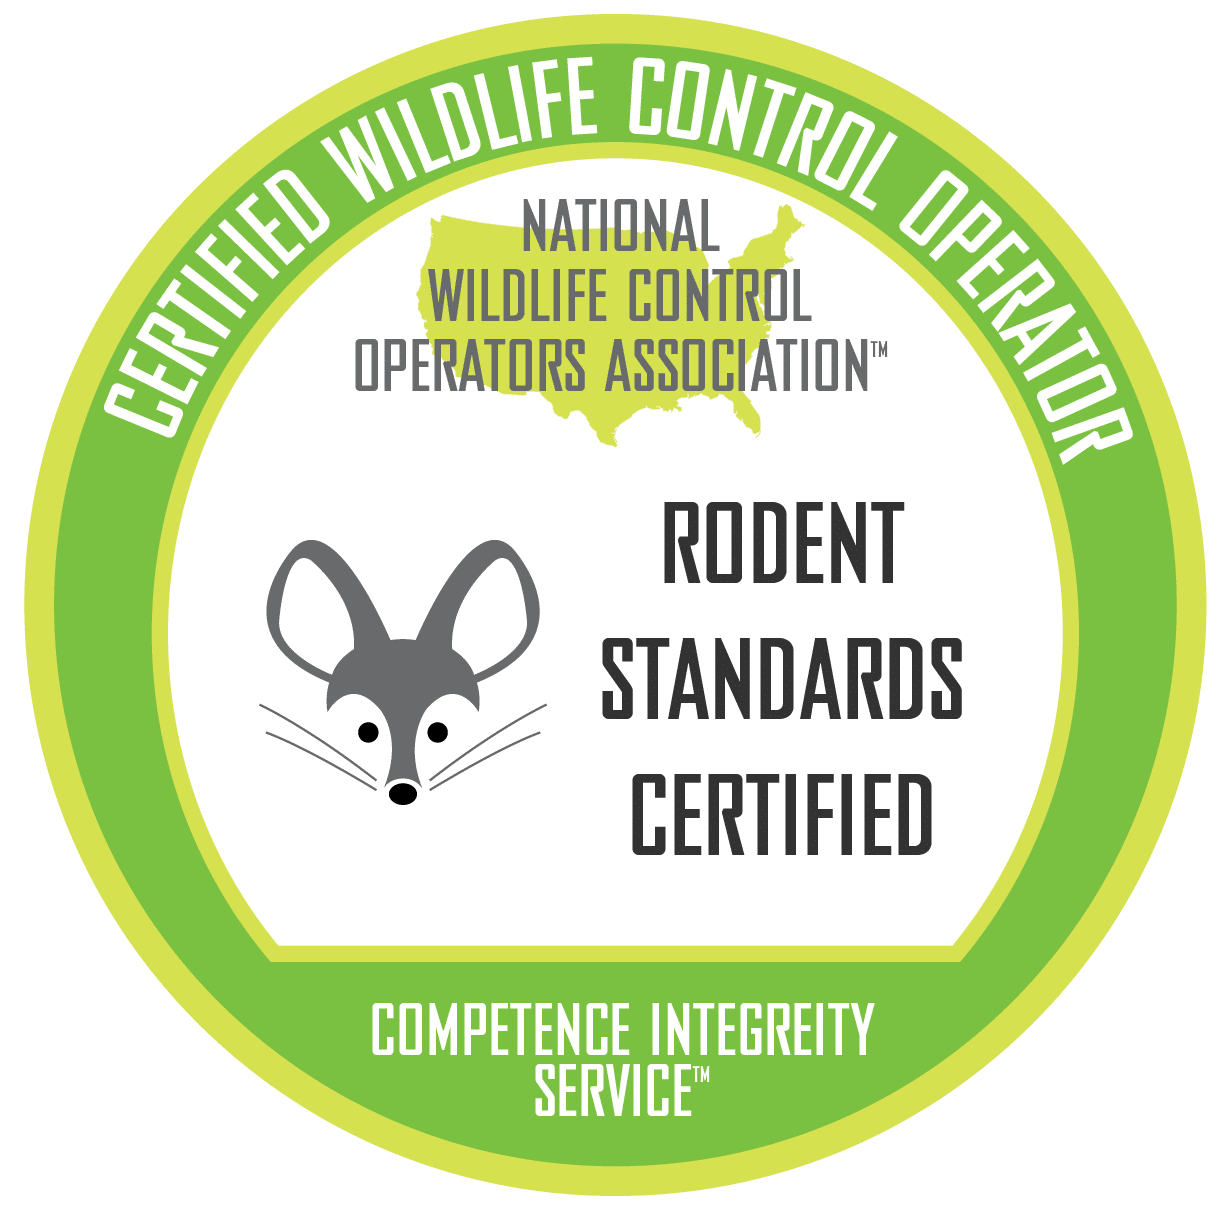 rodent standards certified